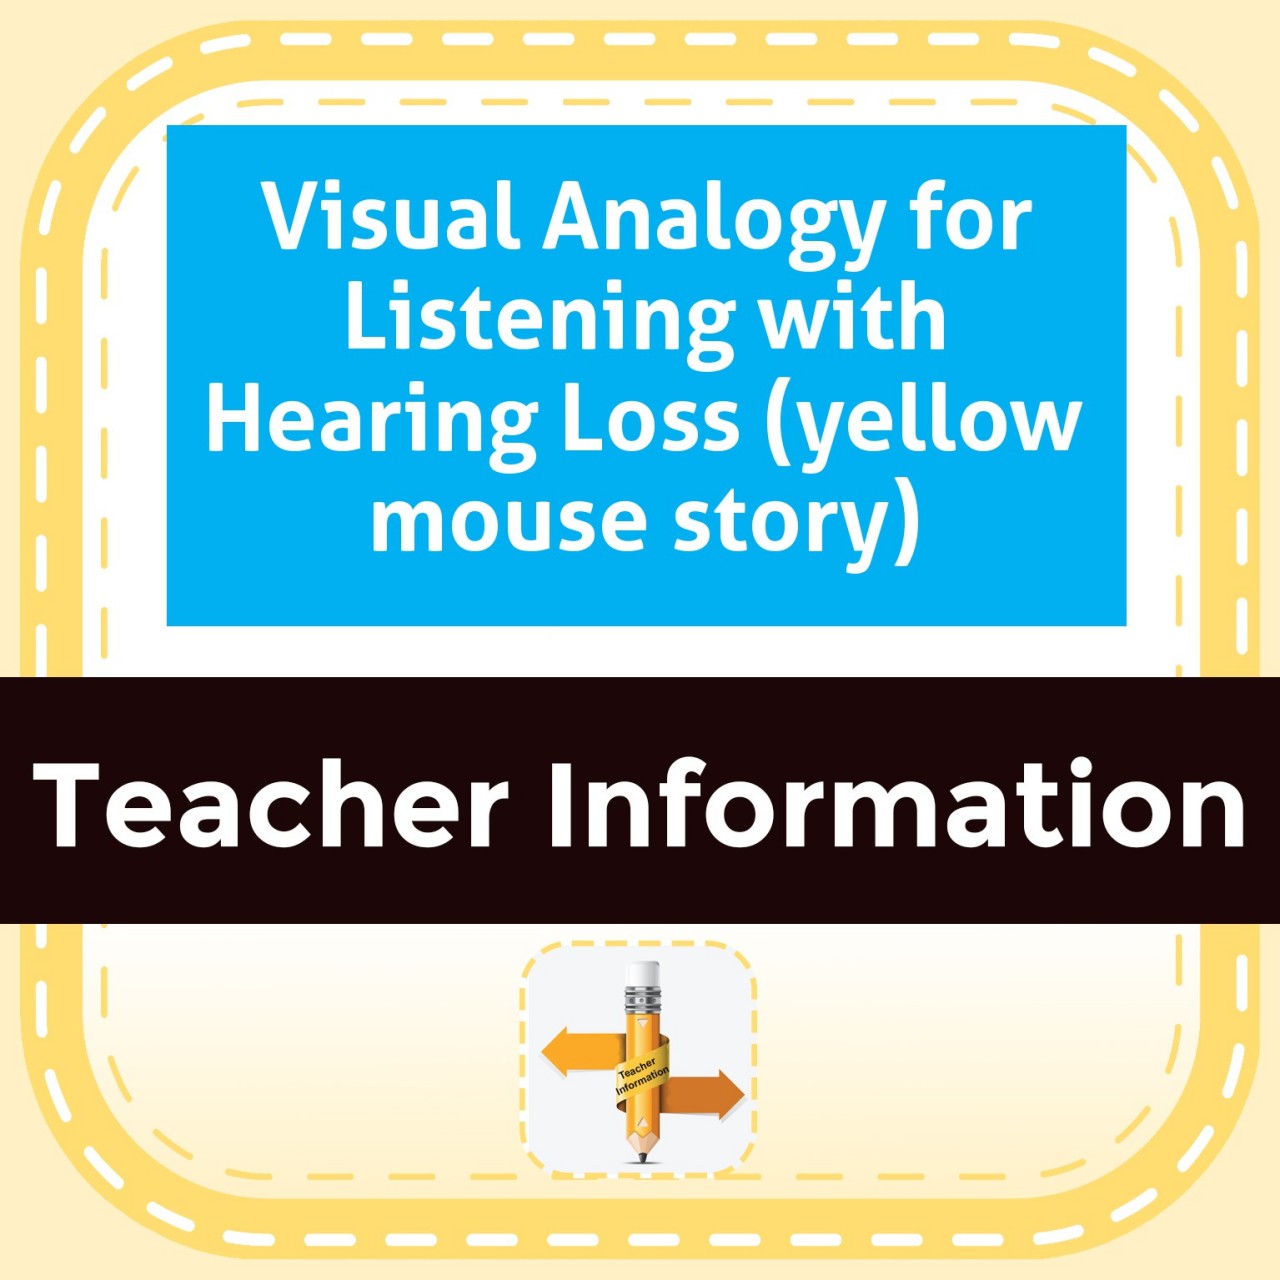 Visual Analogy for Listening with Hearing Loss (yellow mouse story)